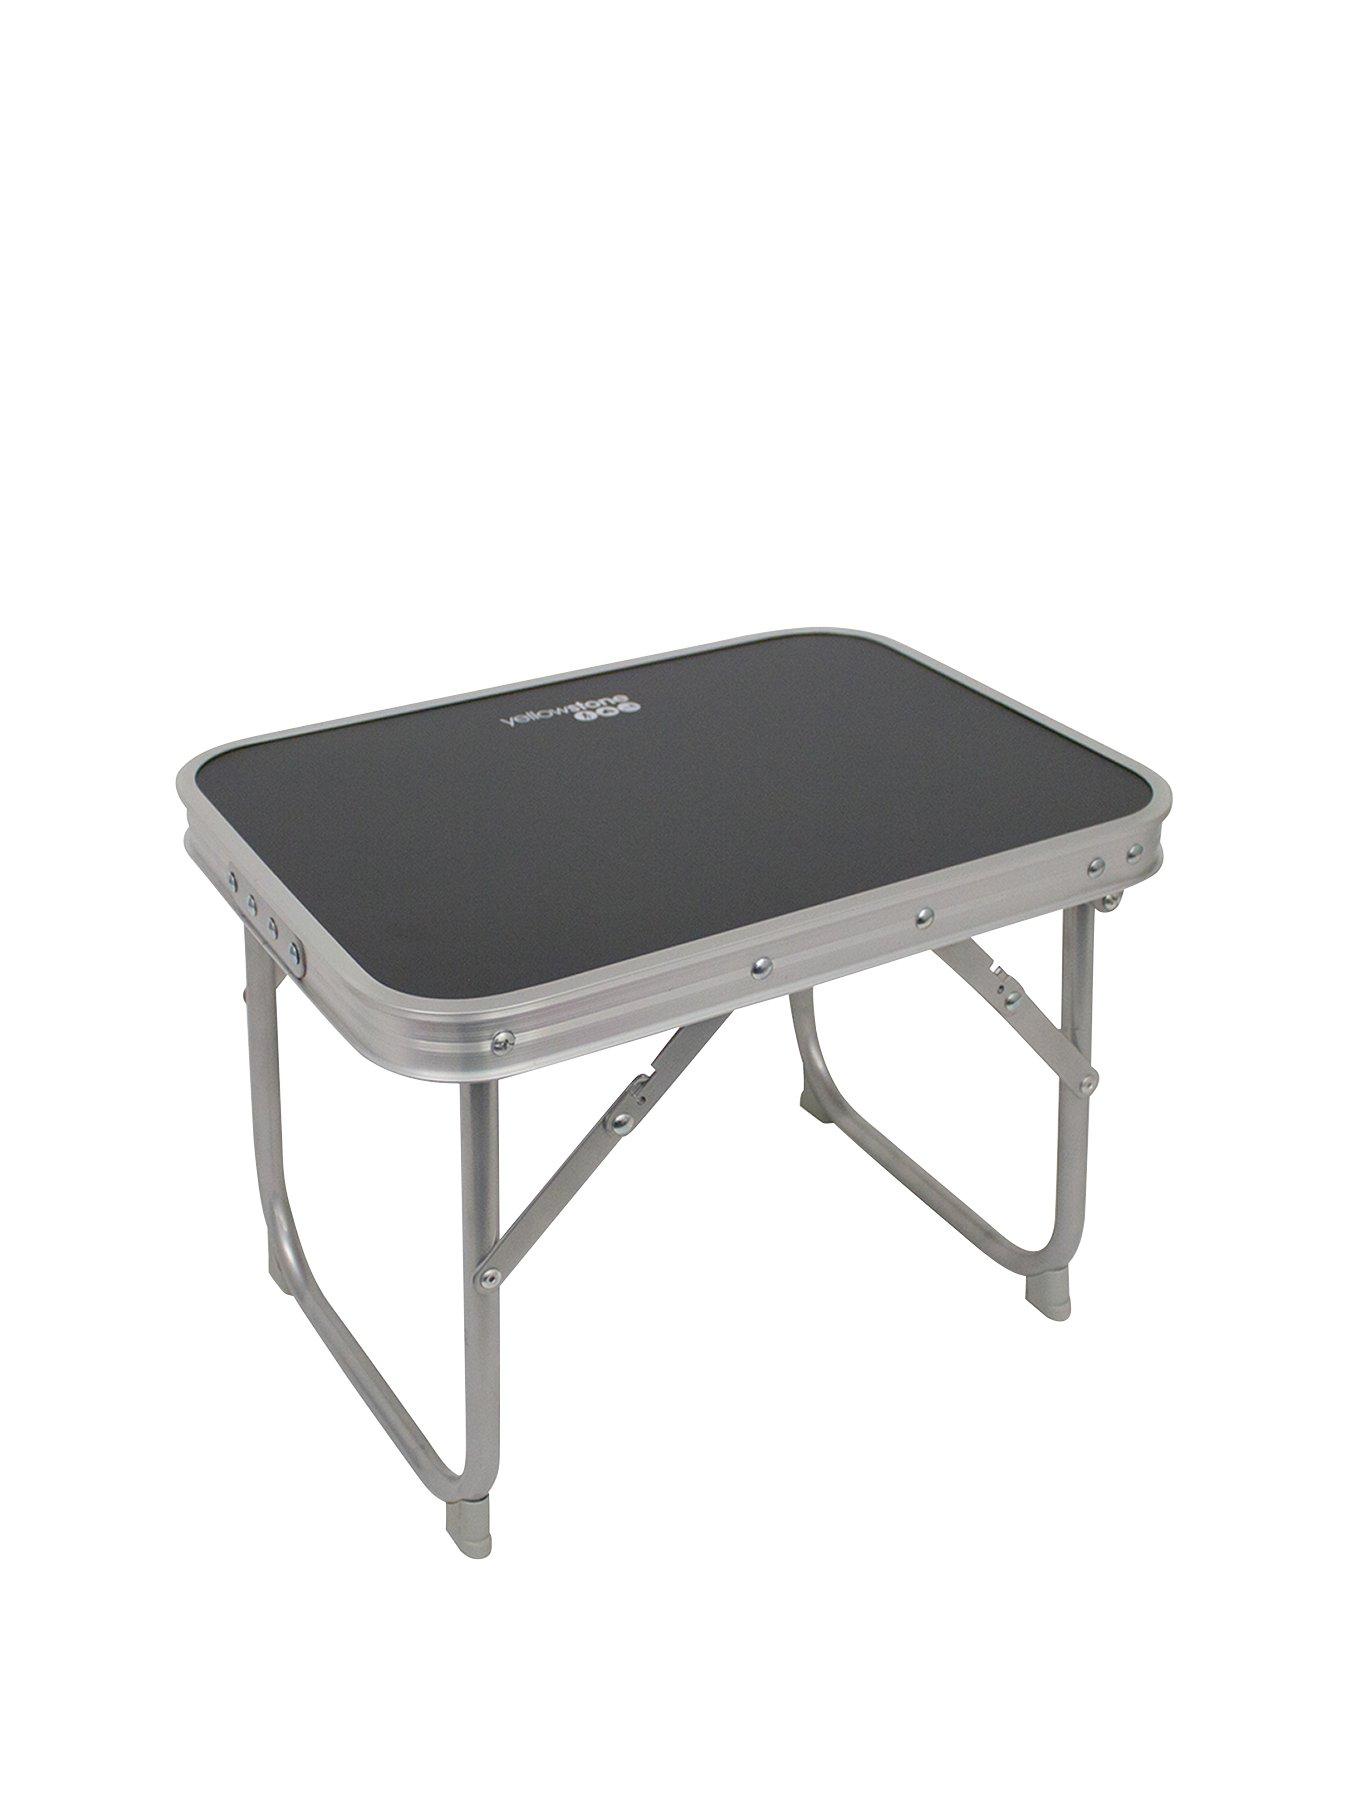 Yellowstone Black/Silver Low Level Folding Table | very.co.uk